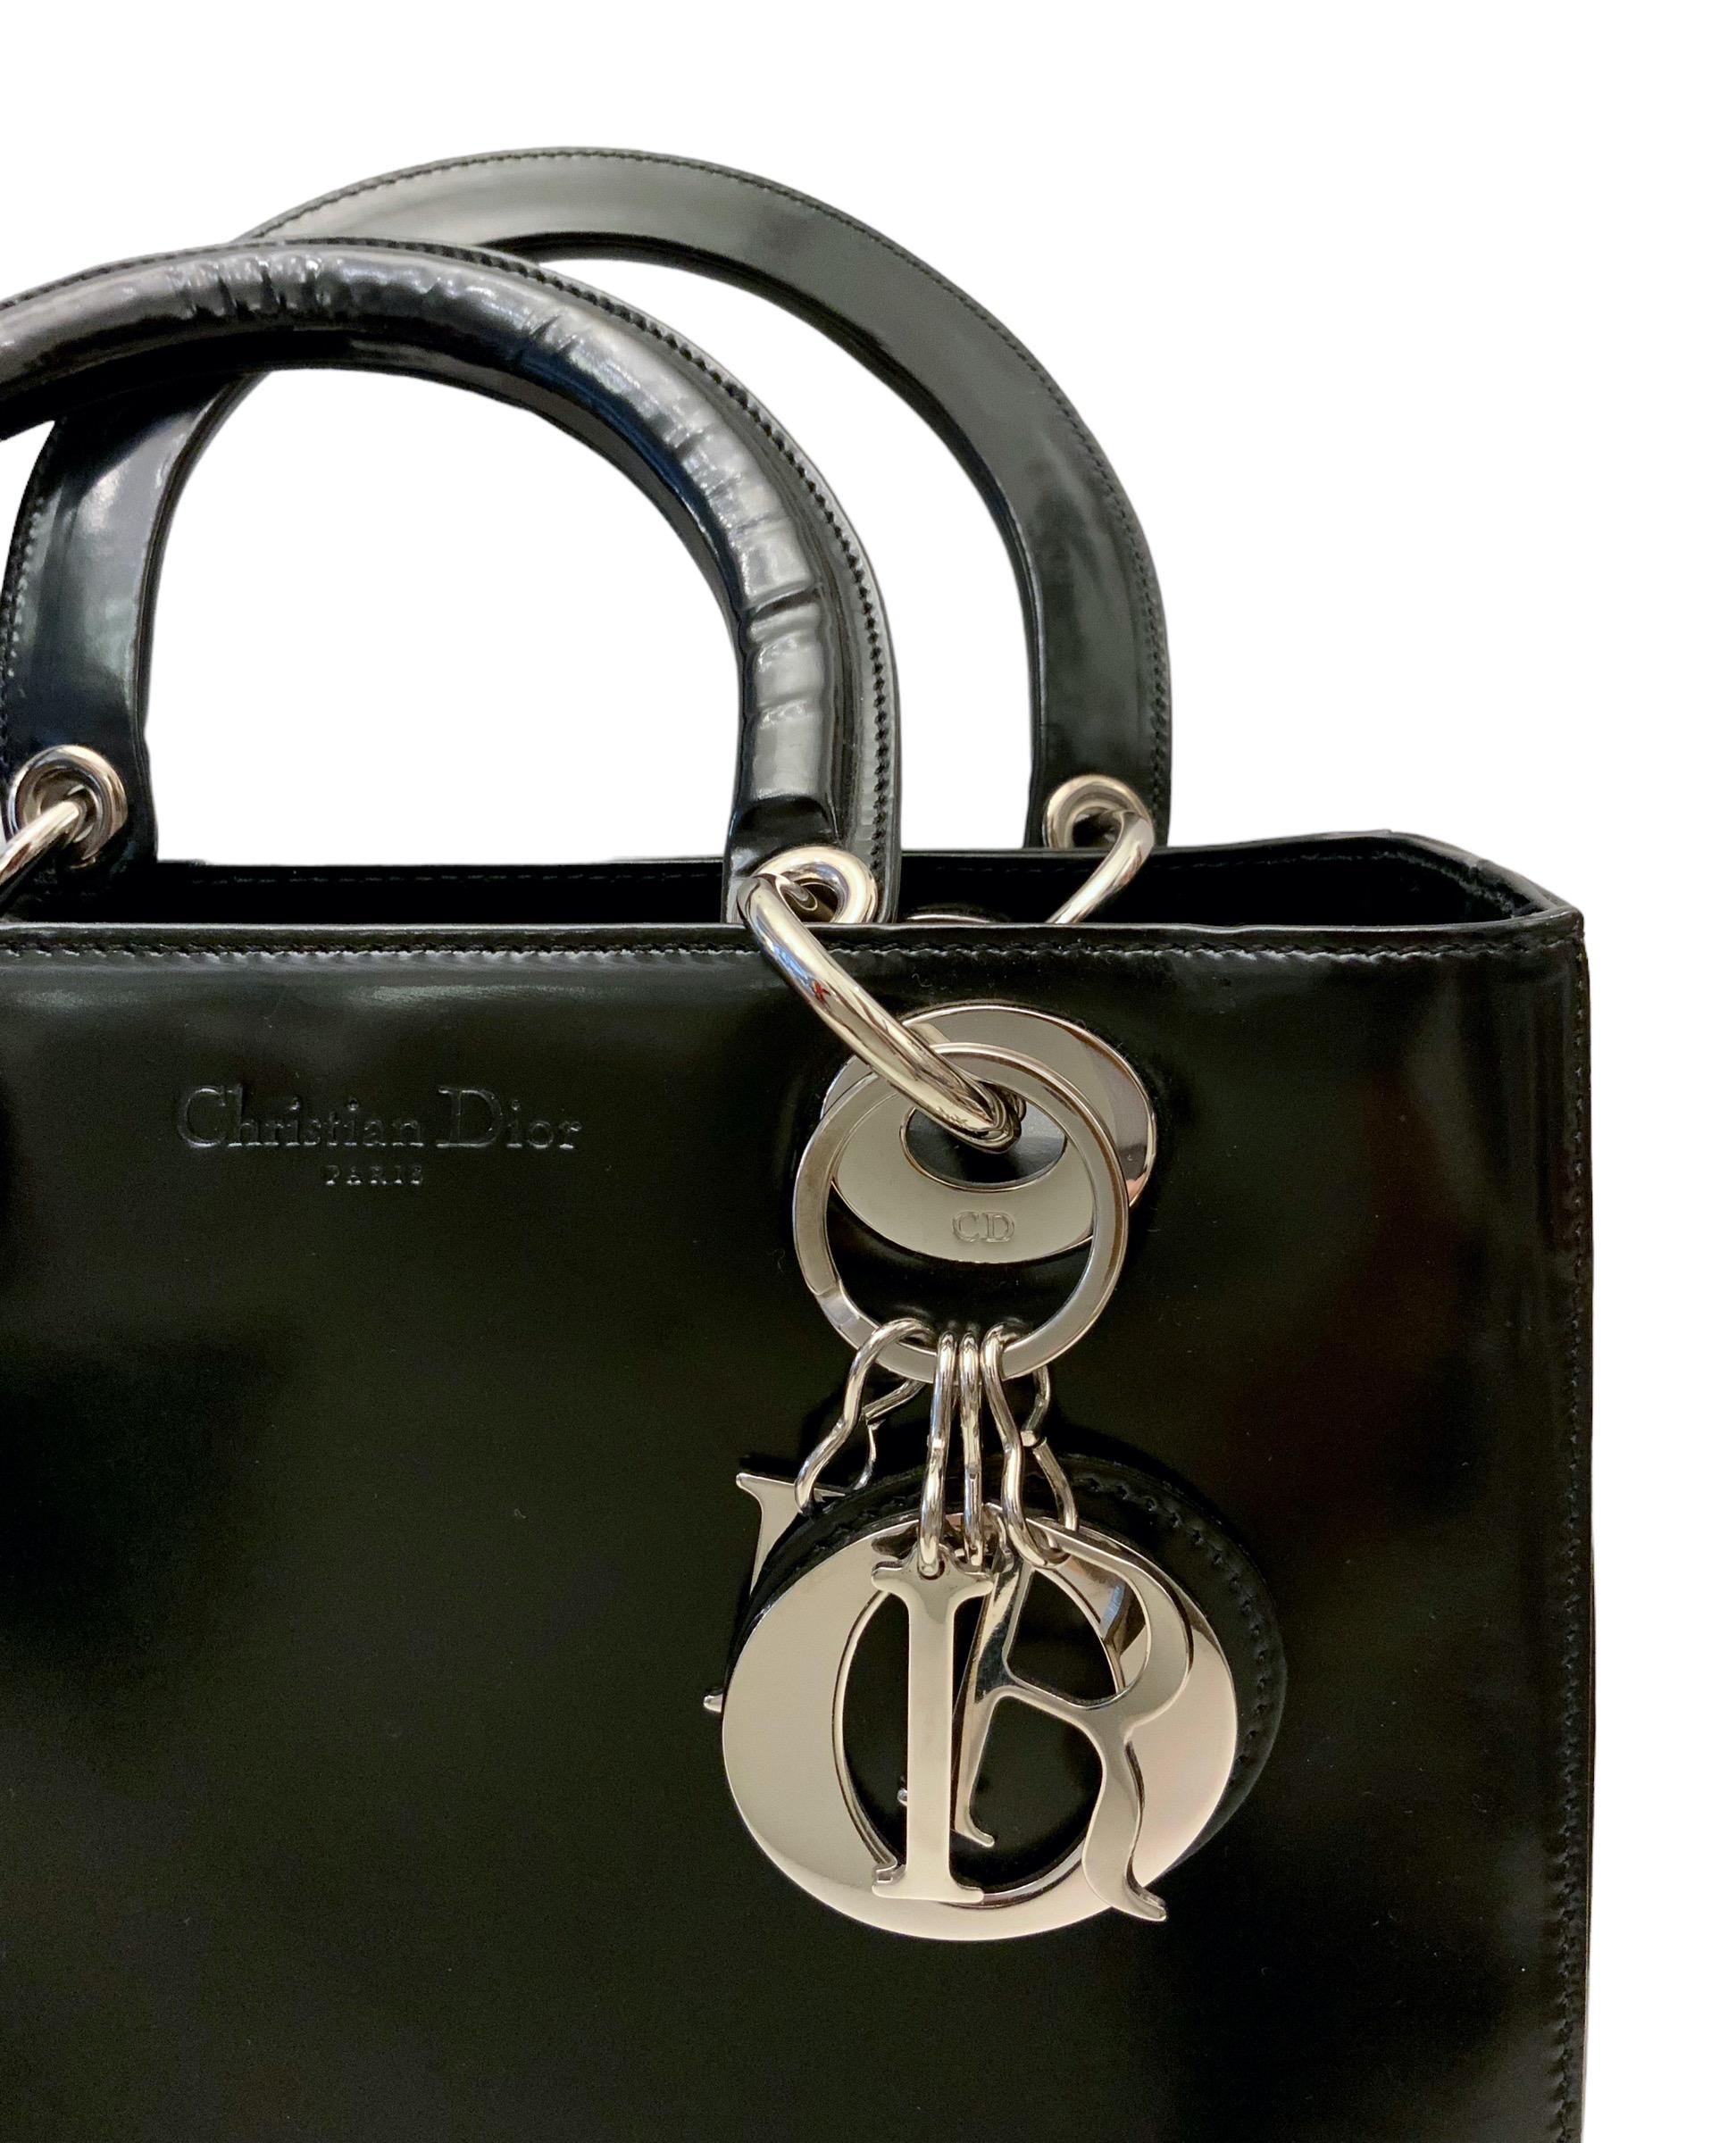 Beautiful vintage piece from the Lady Dior Collection.
Crafted in a black spazzolato leather, a signature variety with an appearance in between polished and patent leather due to the moderate gloss.
In very good condition it features a strap for